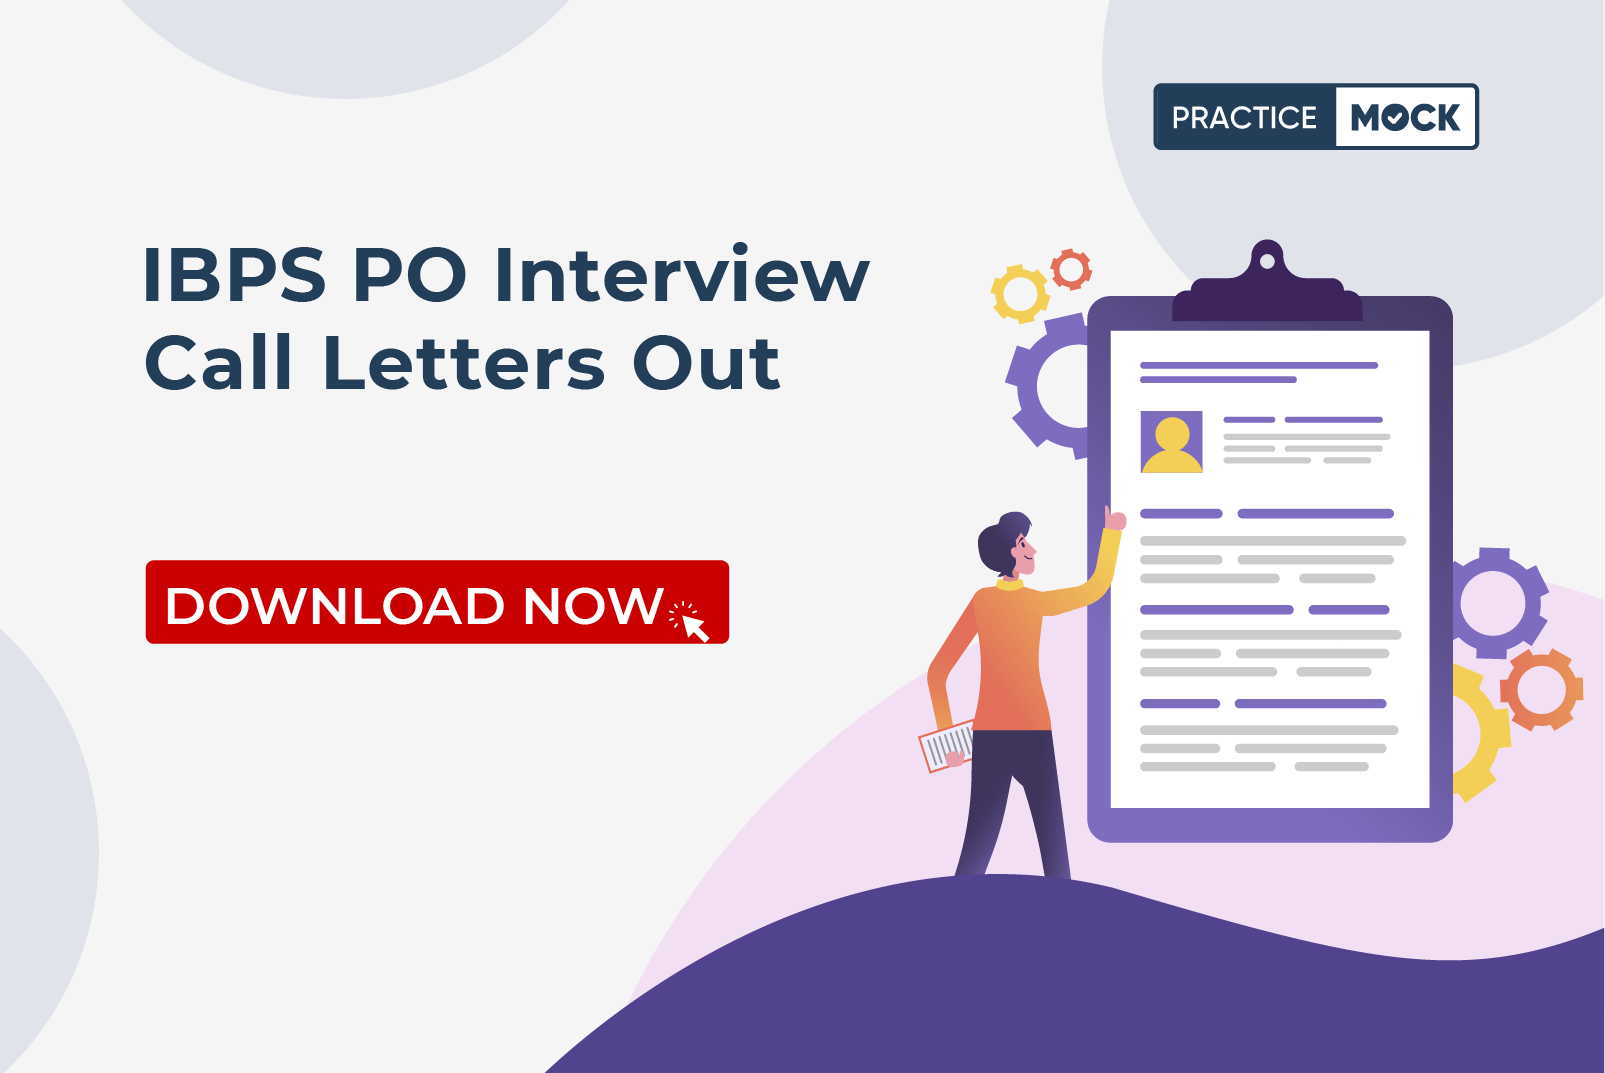 IBPS PO Interview Call Letter